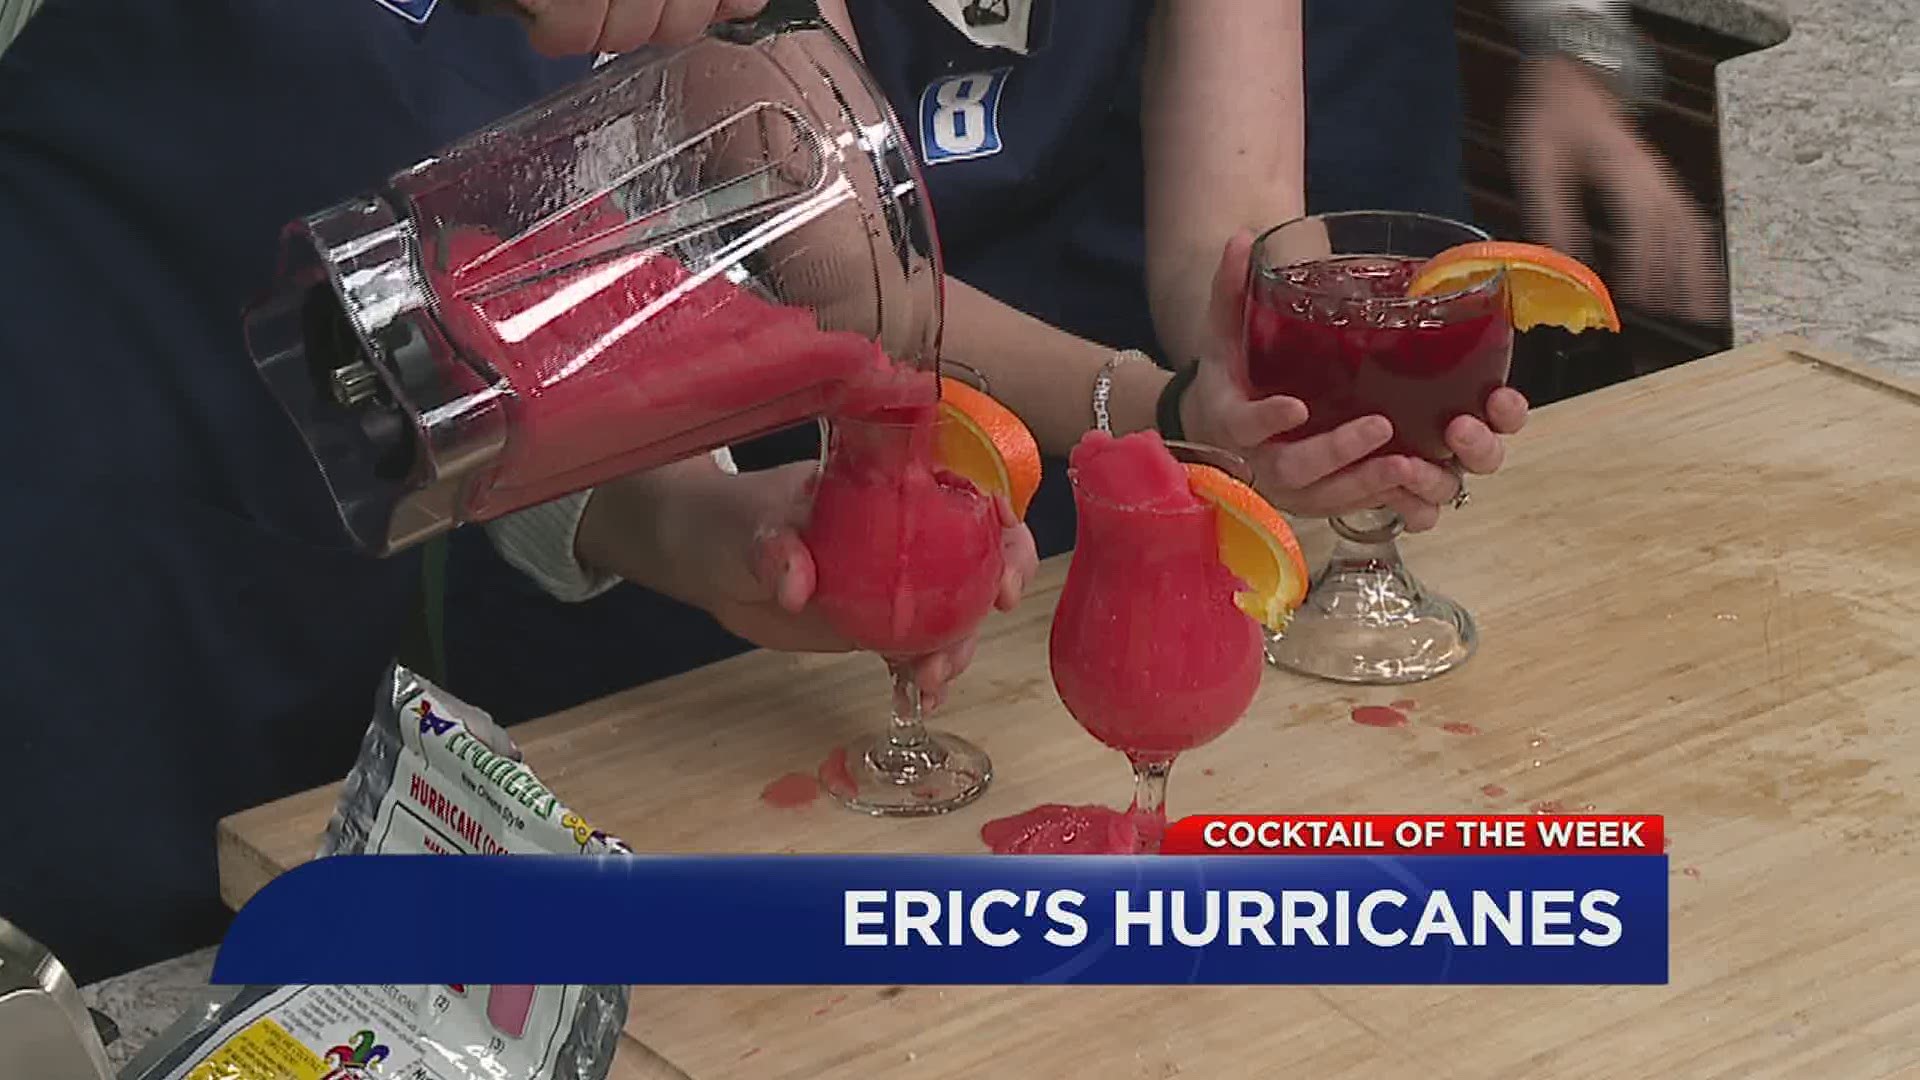 Cocktail of the Week: Eric's Hurricanes